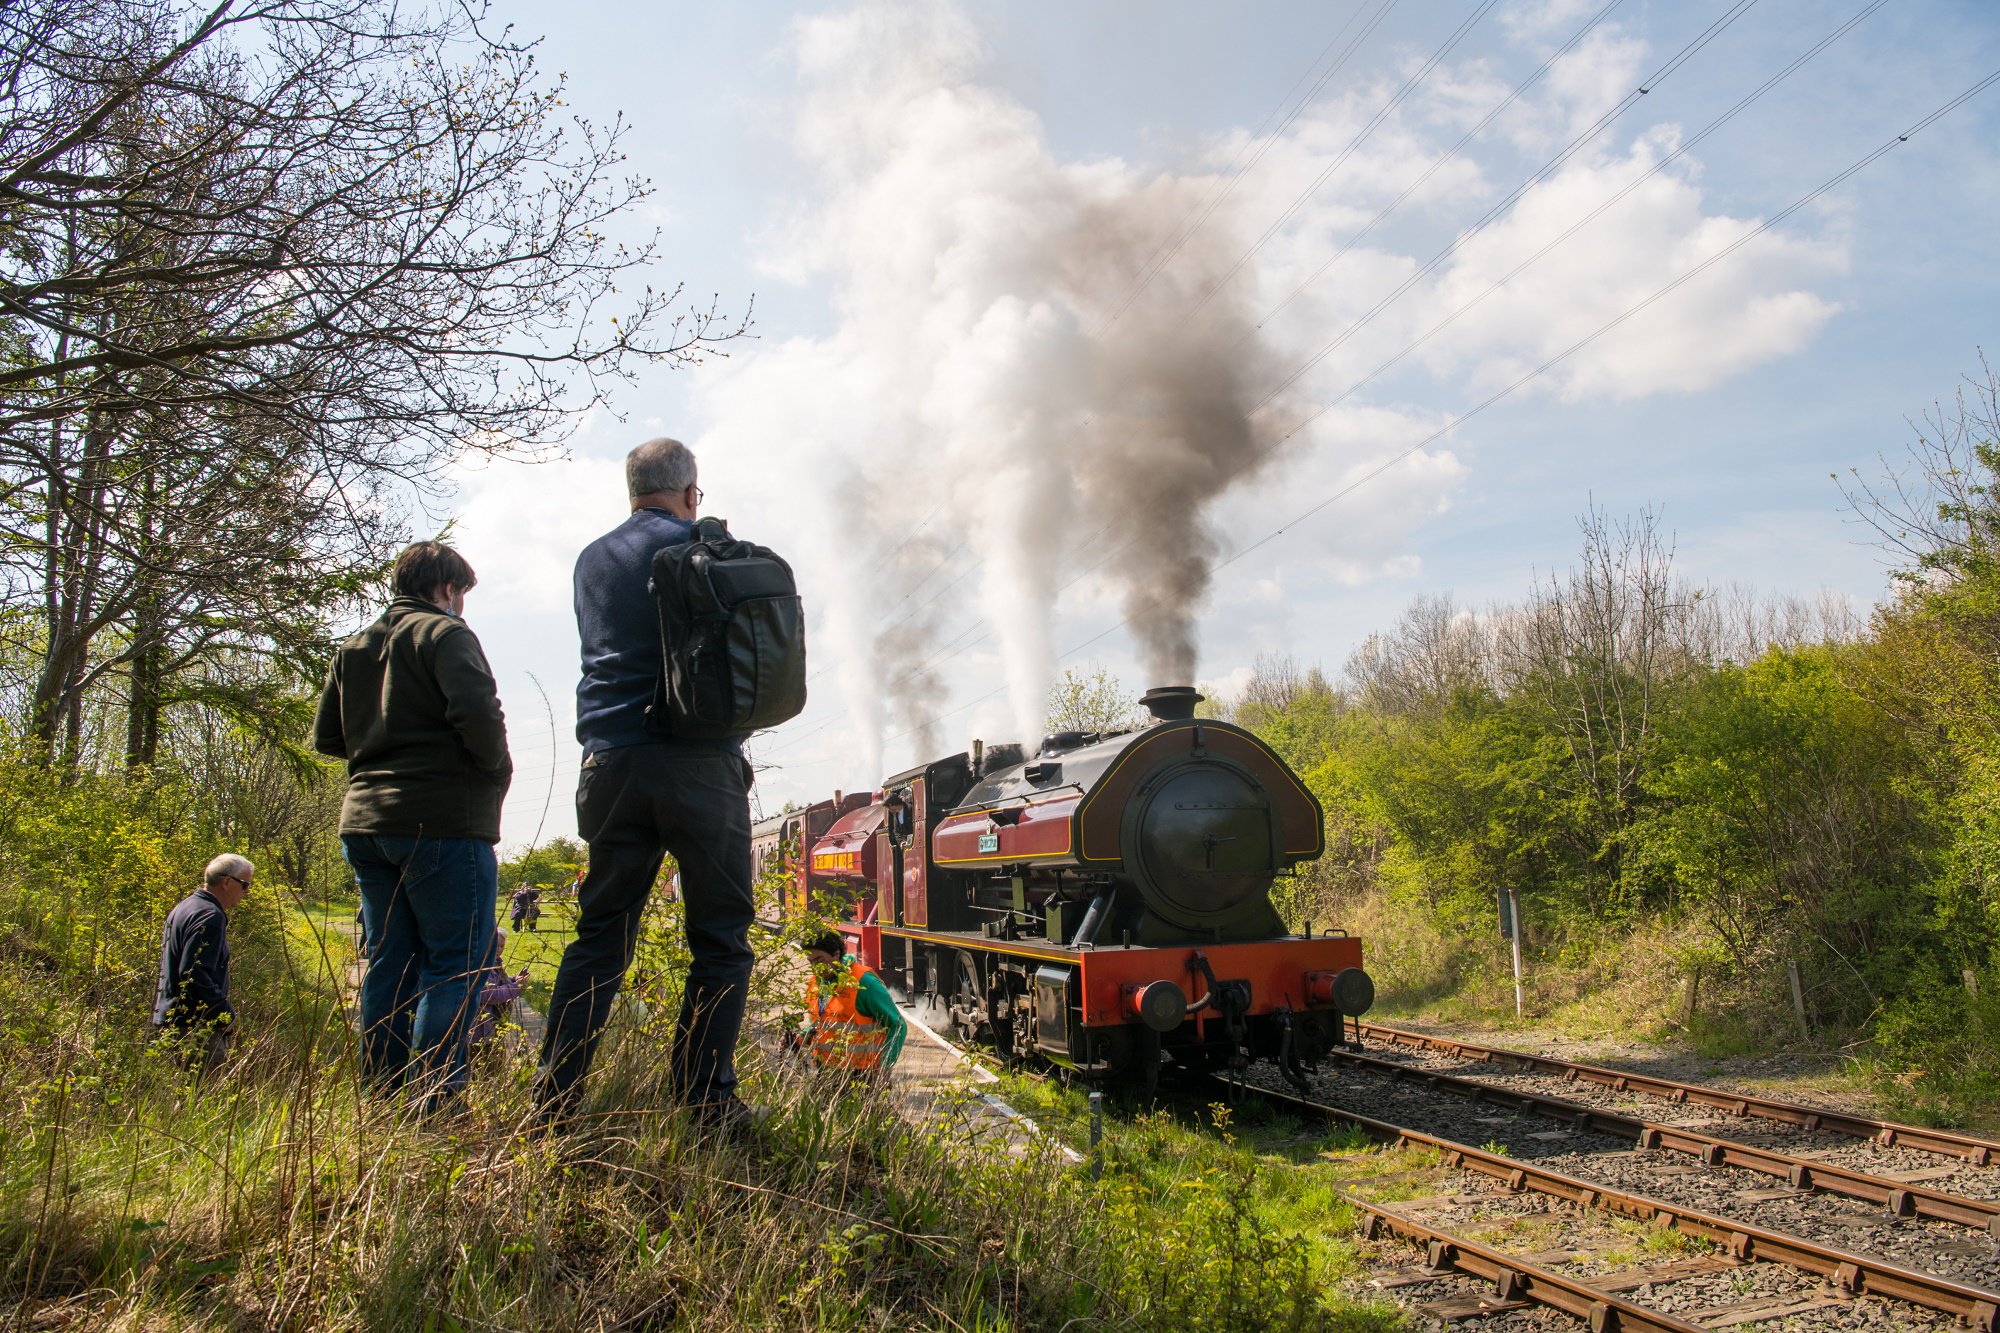 Onlookers watch a steam train go by at a heritage railway.